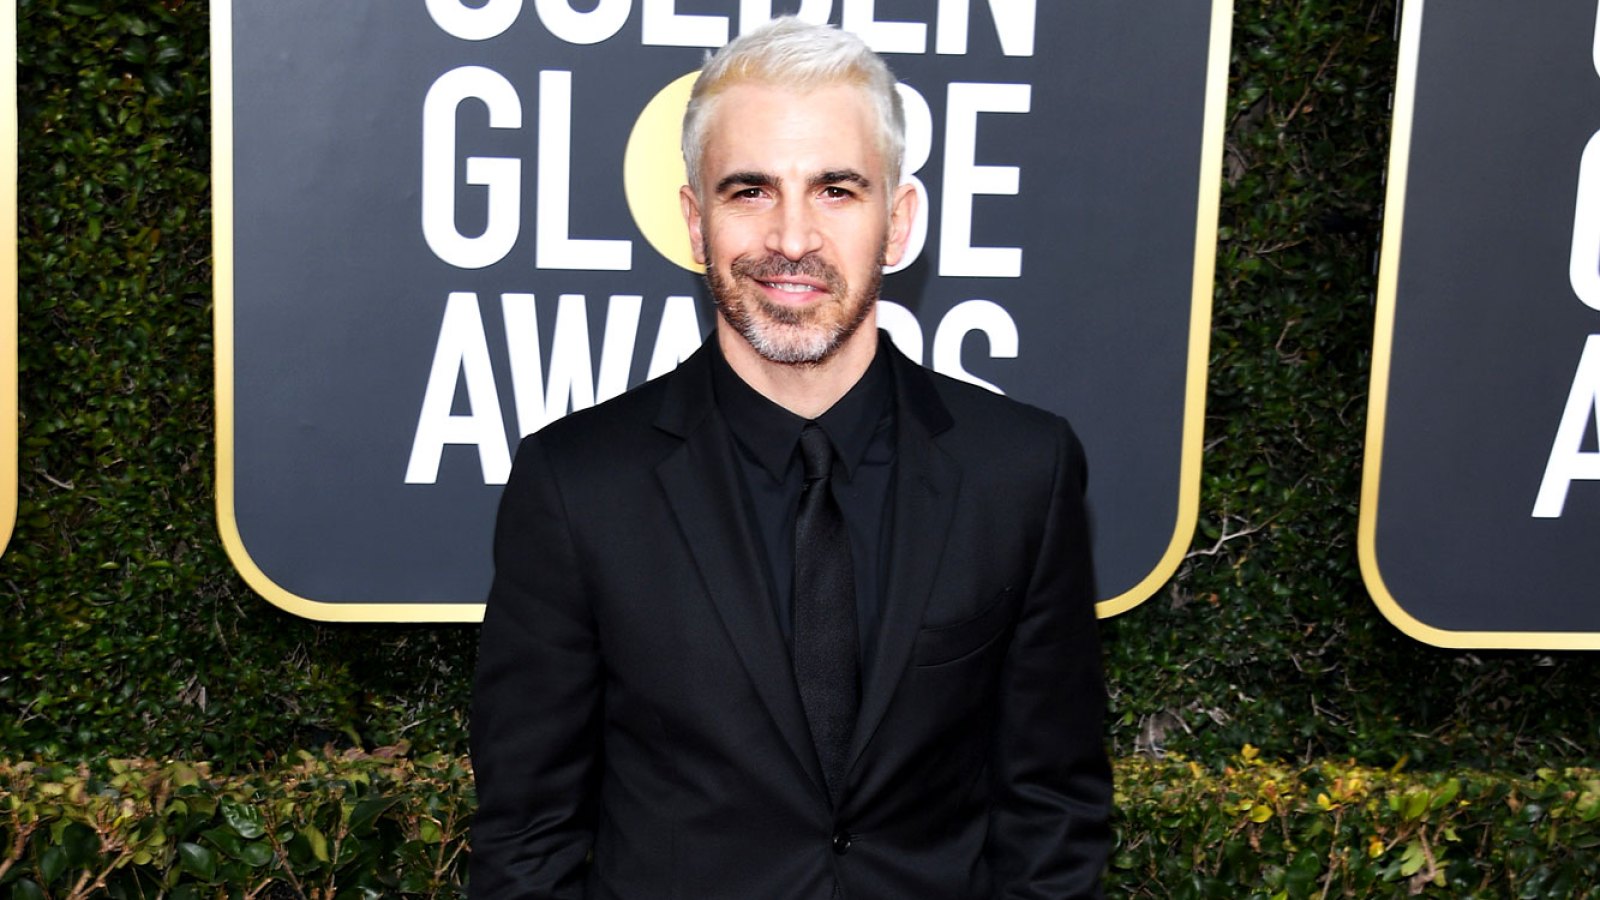 UsWeekly/ Stylish - Twitter Is Losing Their Minds Over Chris Messina's Platinum Blonde Hair on the 2019 Golden Globes Red Carpet